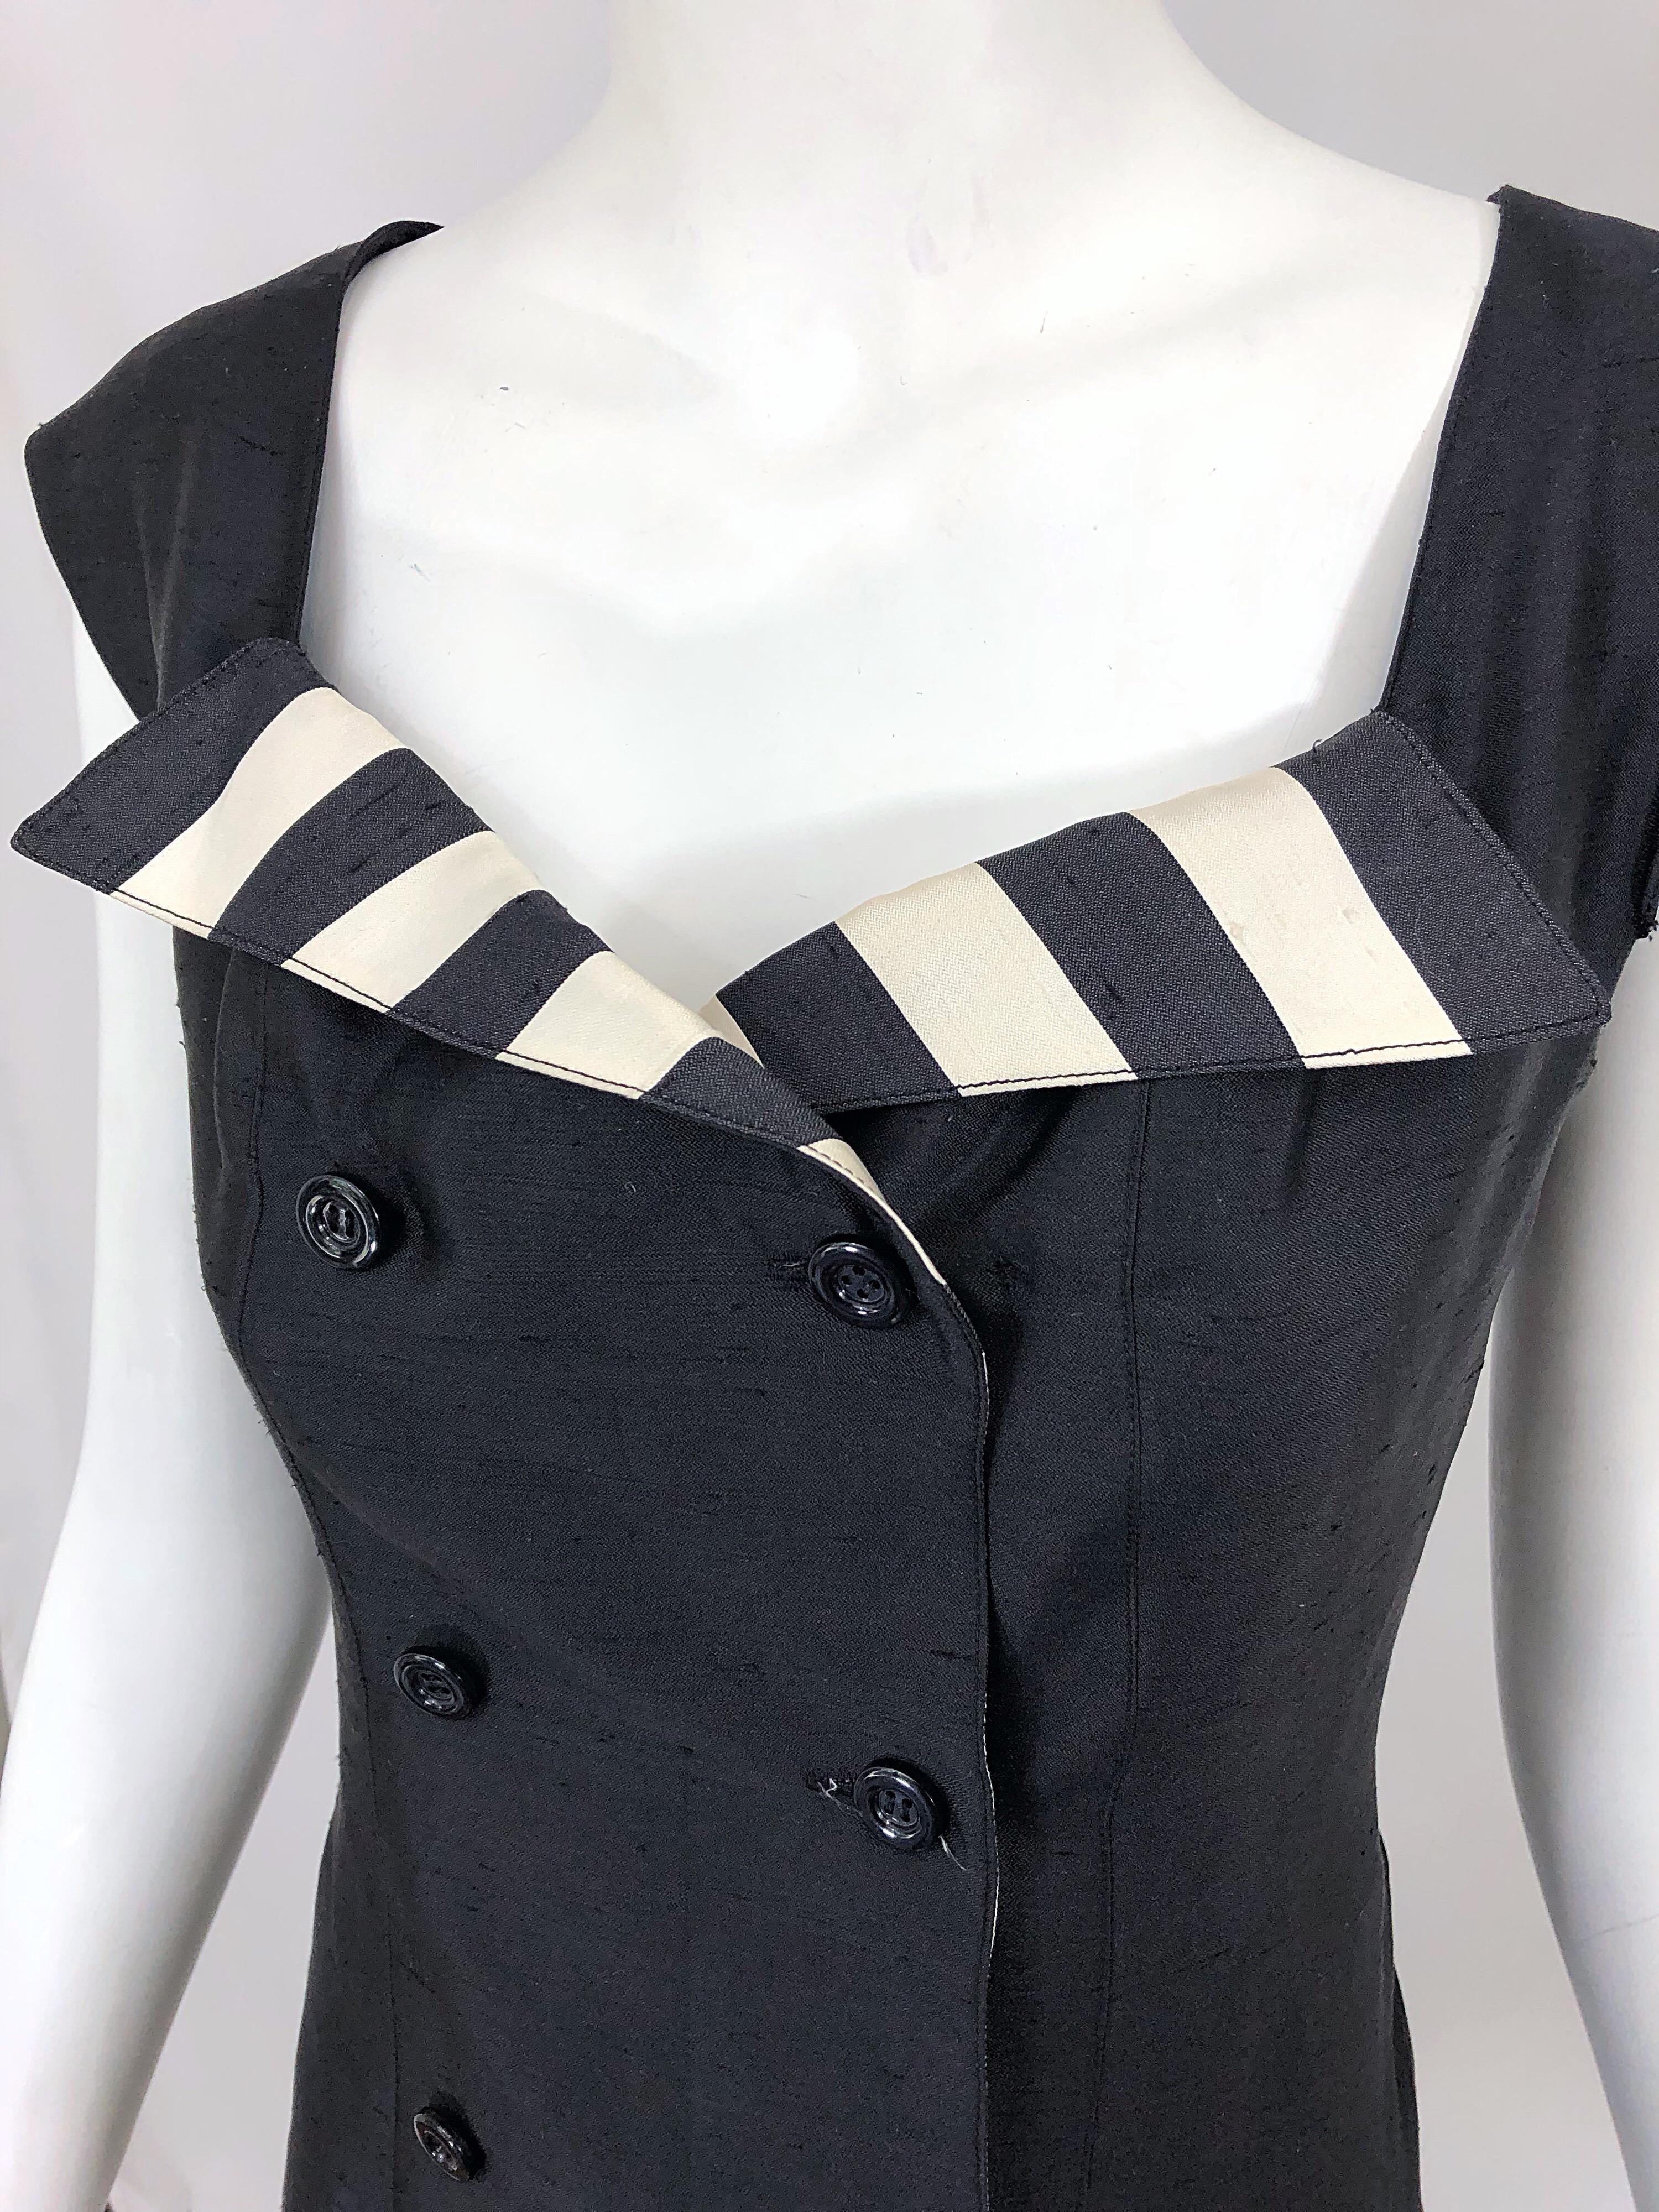 Vintage Bernard Perris Size 12 Black and White Striped 1990s Silk Dress For Sale 2